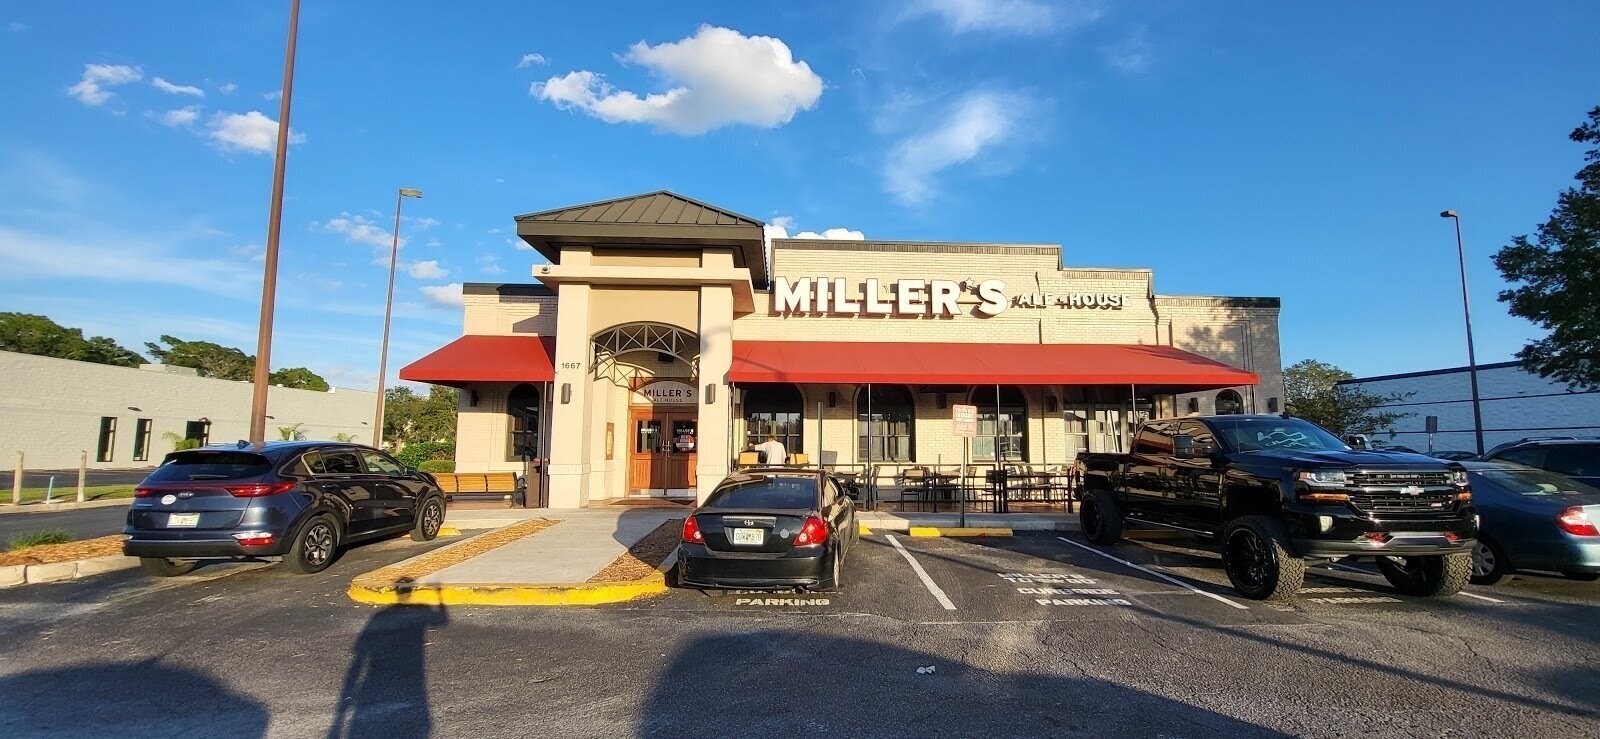 <span class="translation_missing" title="translation missing: en.meta.location_title, location_name: Miller&#39;s Ale House, city: Orlando">Location Title</span>